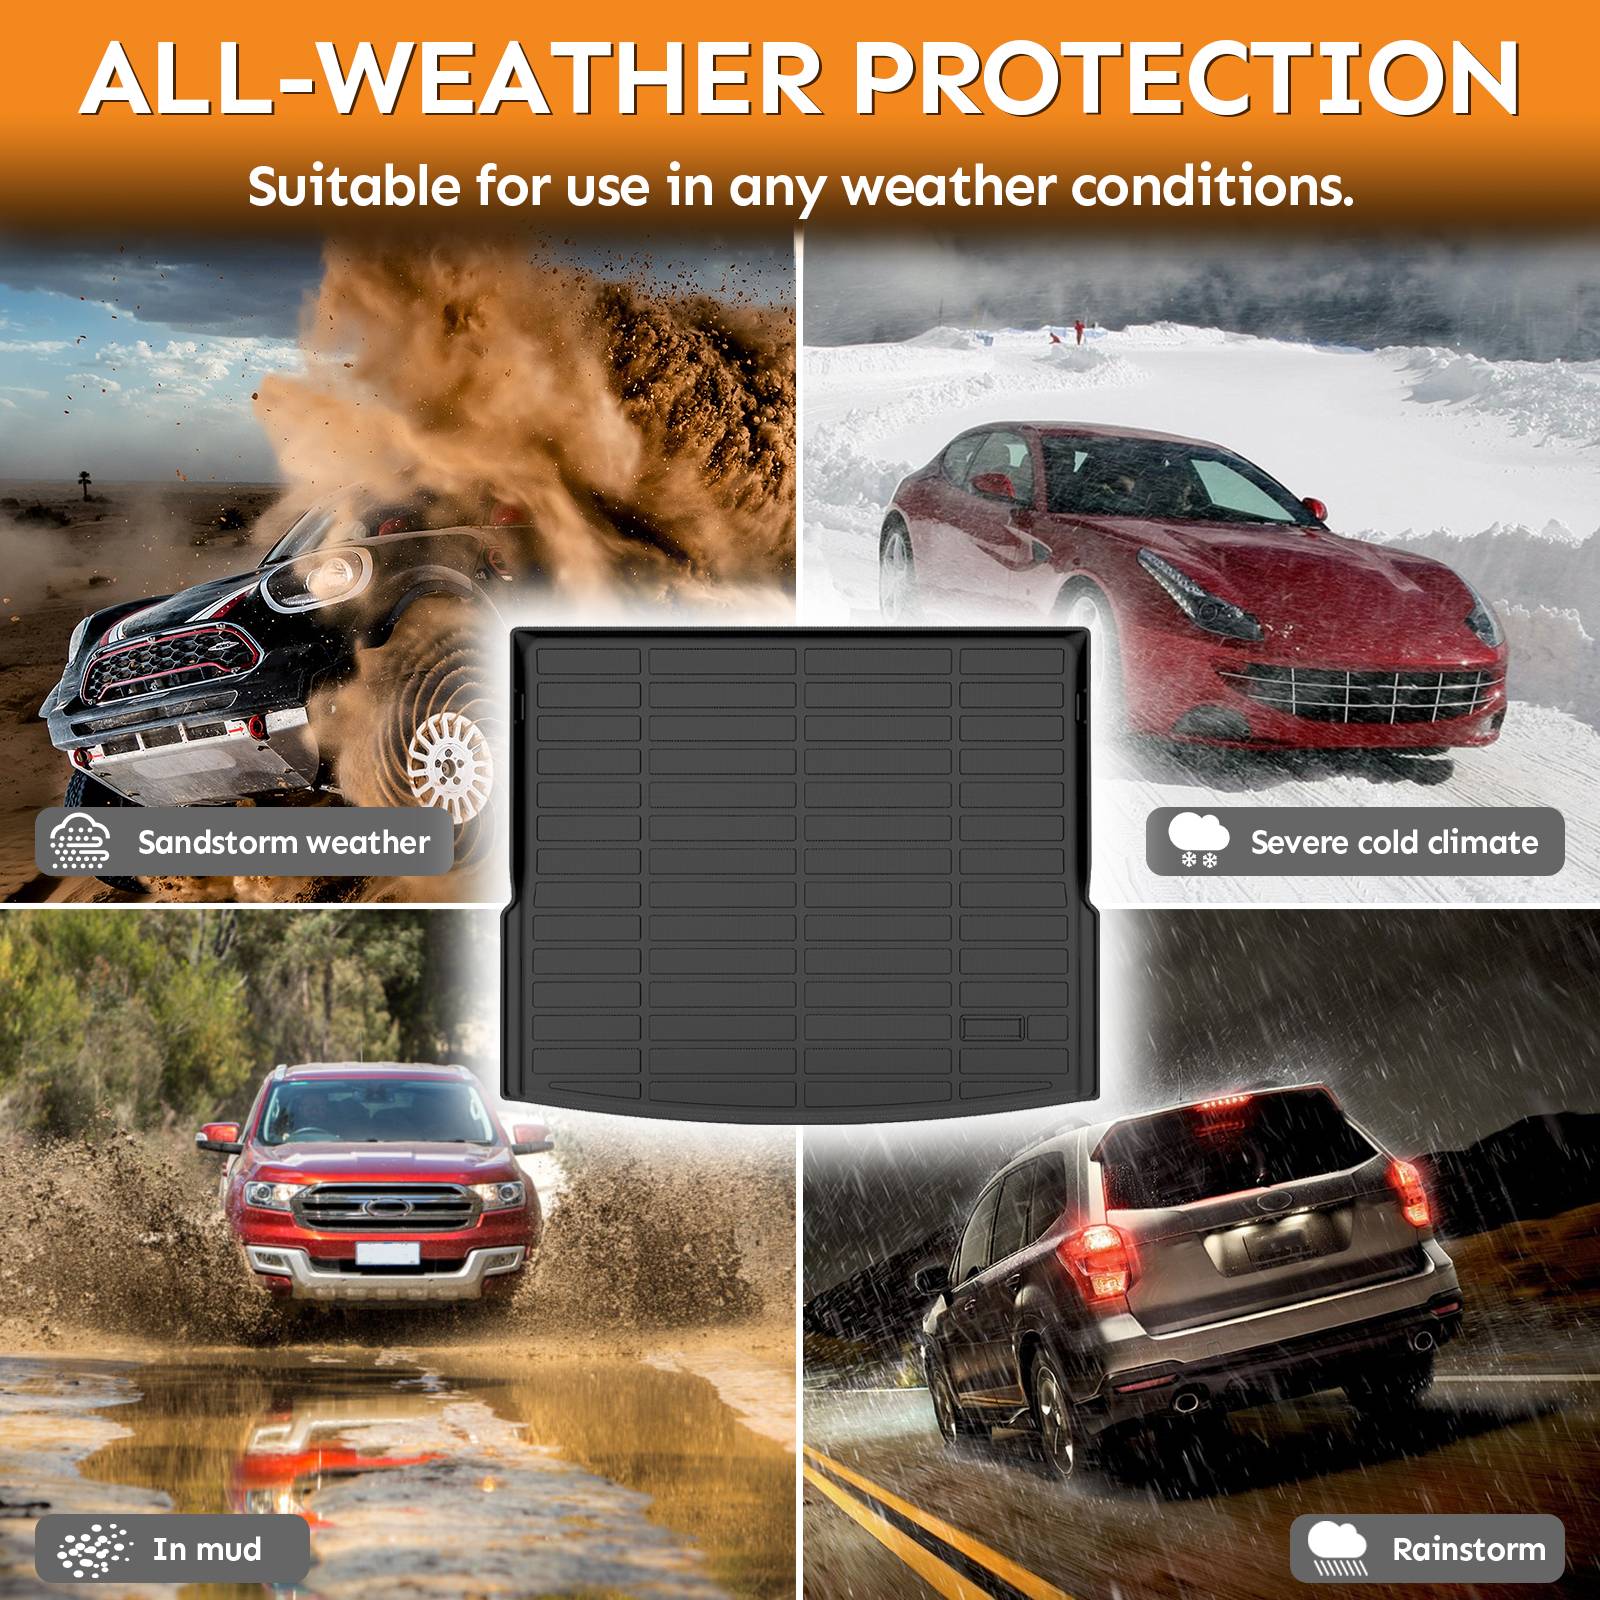 Binmotor-Cargo Liner for All Weather Cargo Liner for Honda HR-V, Custom Fit Car Trunk Mat, Waterproof Easy to Clean Cargo Mat HRV Accessories Black（compatible year 2023-2024）